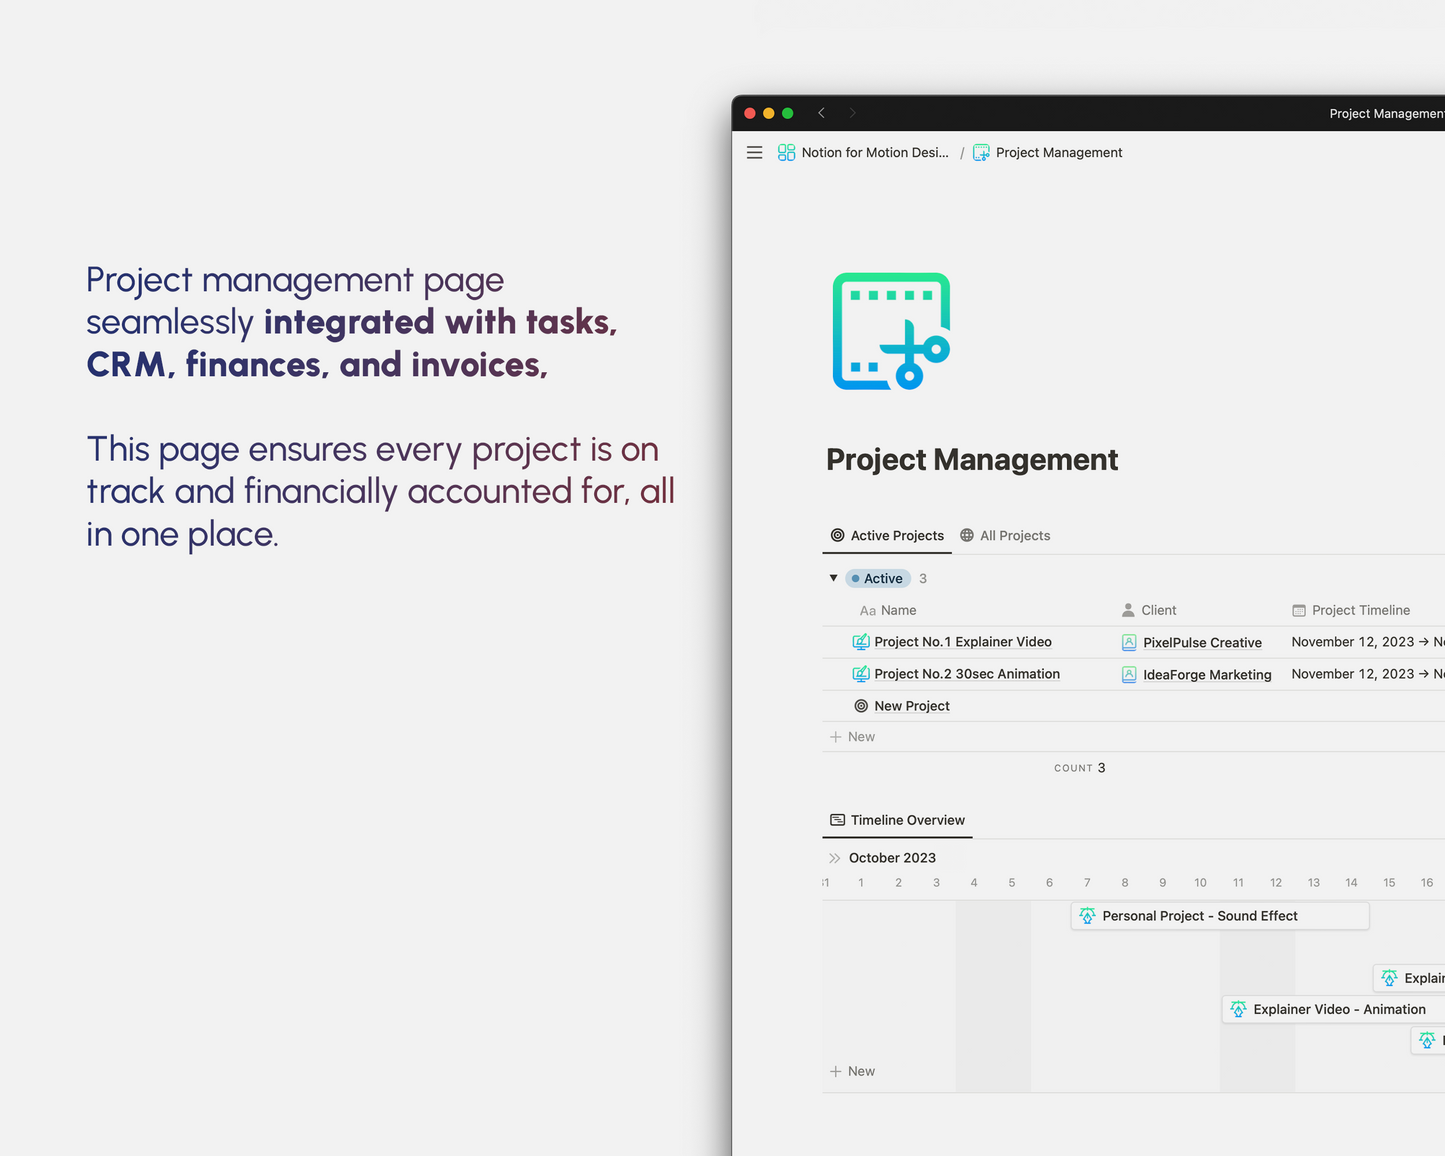  Display of a project management page integrated with tasks, CRM, finances, and invoices. It lists active projects with details such as client, timeline, and a timeline overview with task entries for specific projects.